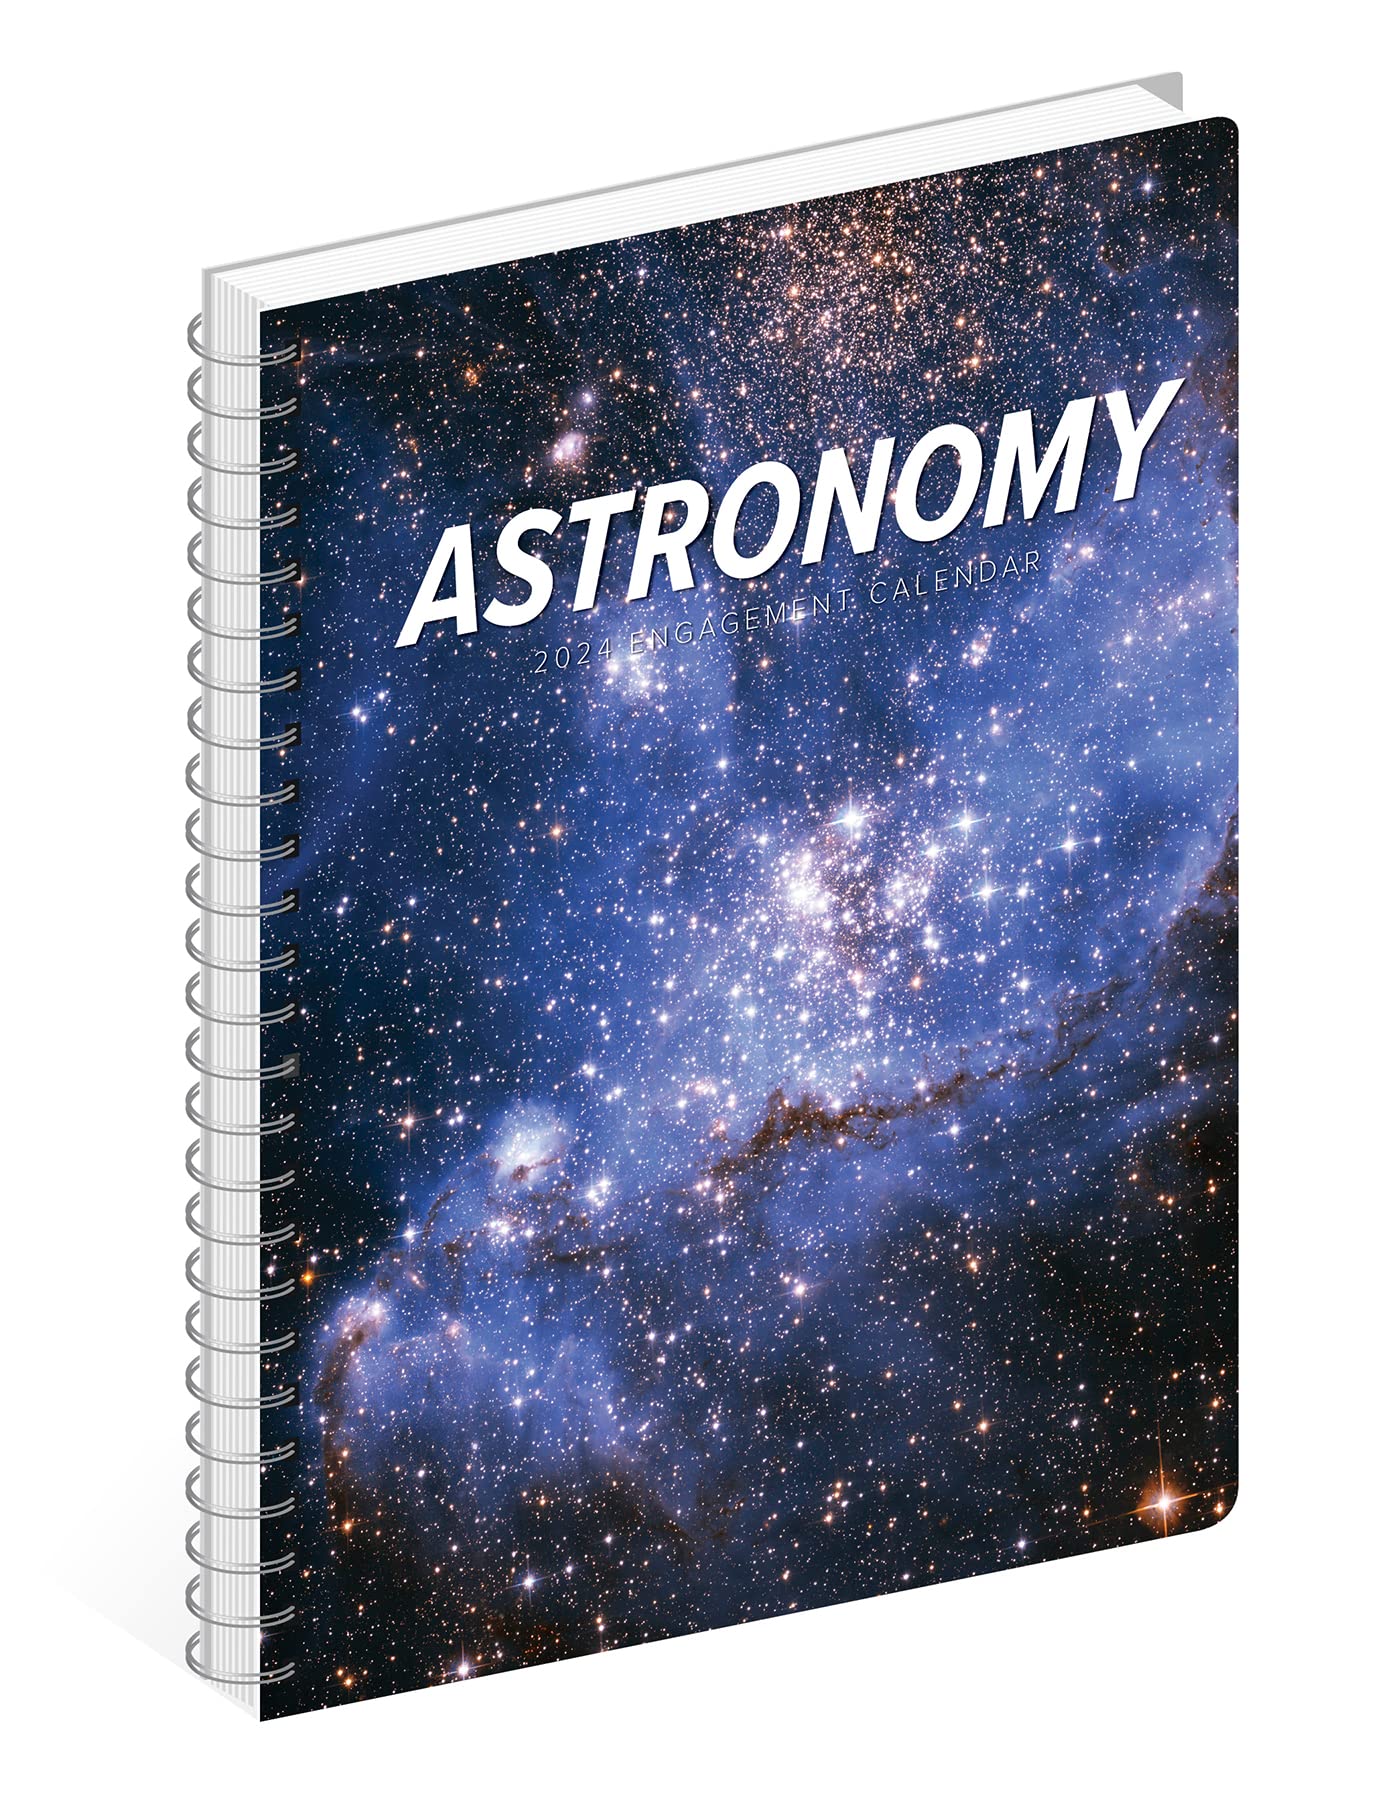 Willow Creek Press Astronomy Softcover Weekly Planner 2024 Spiral-Bound Engagement Calendar (6.5" x 8.5")